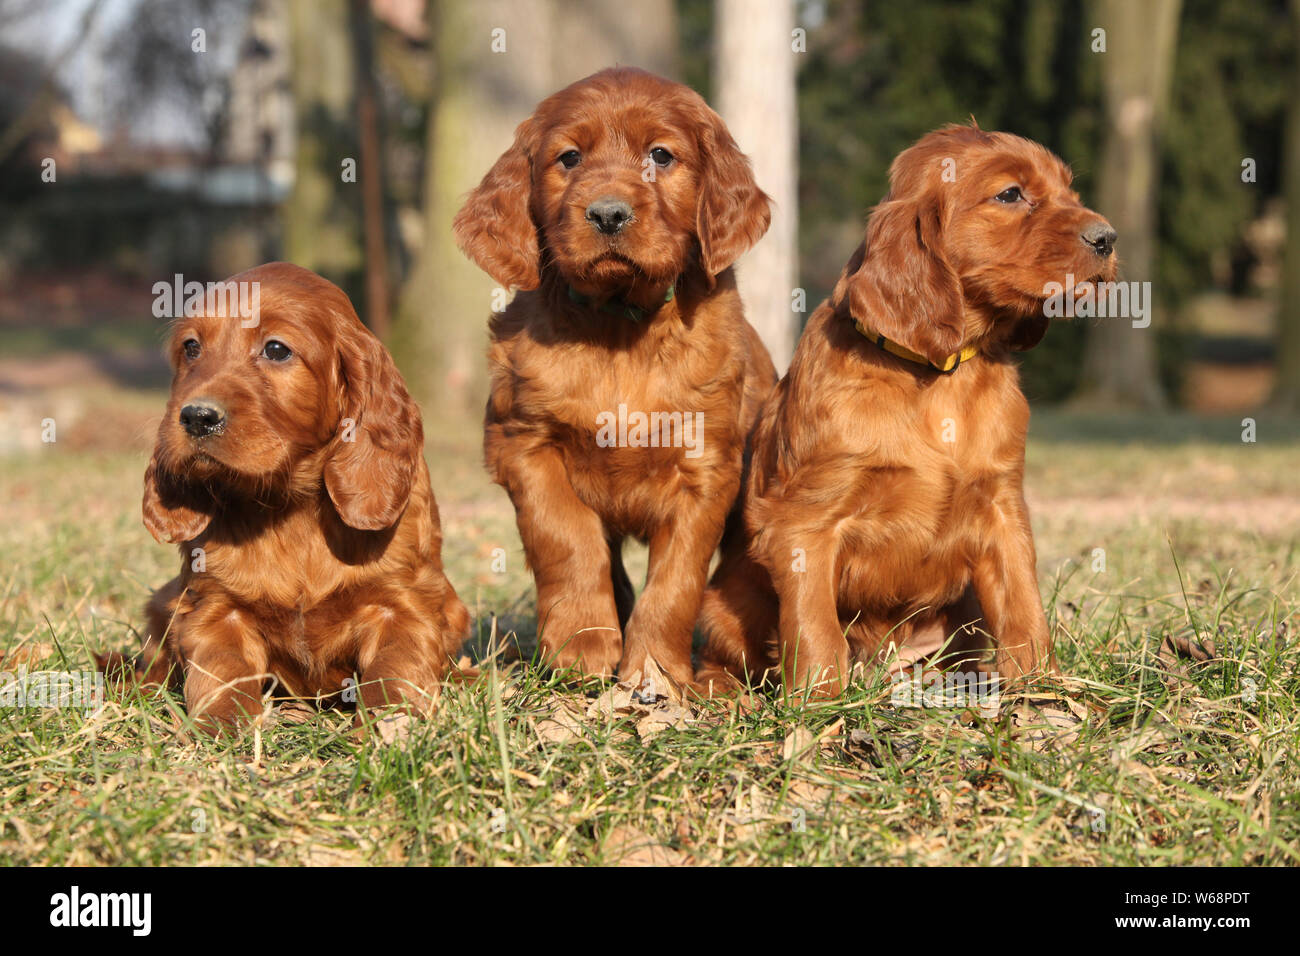 Irish Red Setter Puppies sitting together in nature Stock Photo - Alamy